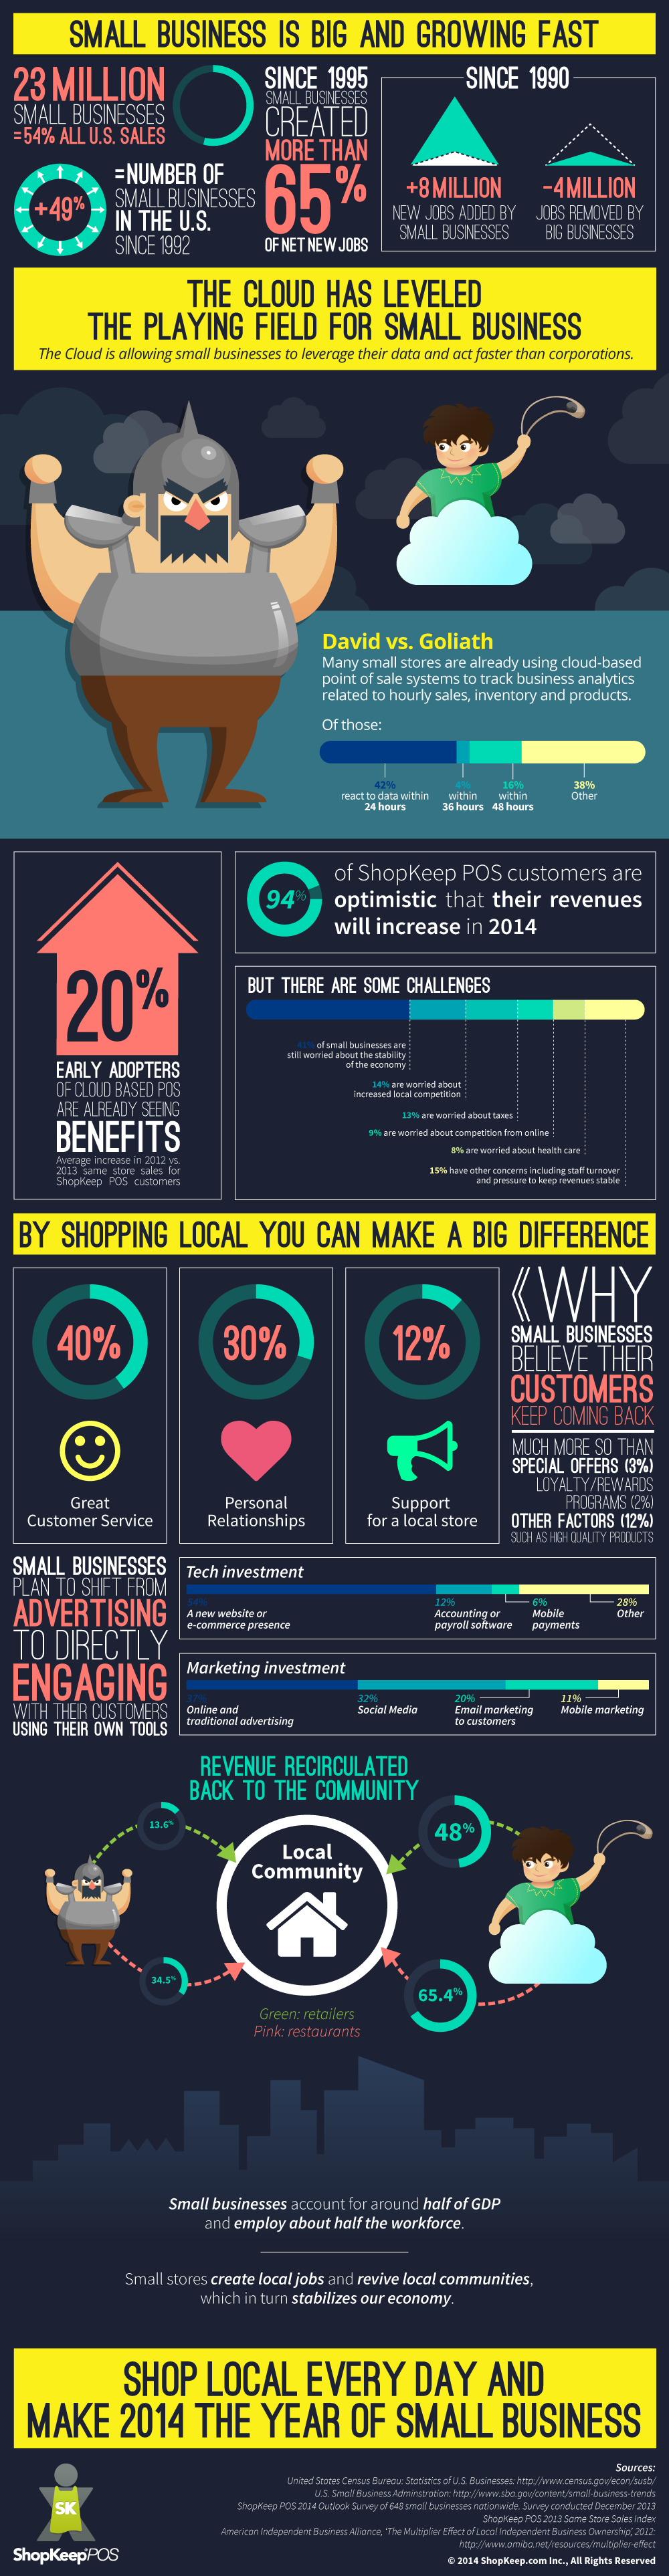 Infographic: Small Business is Big and Growing Fast